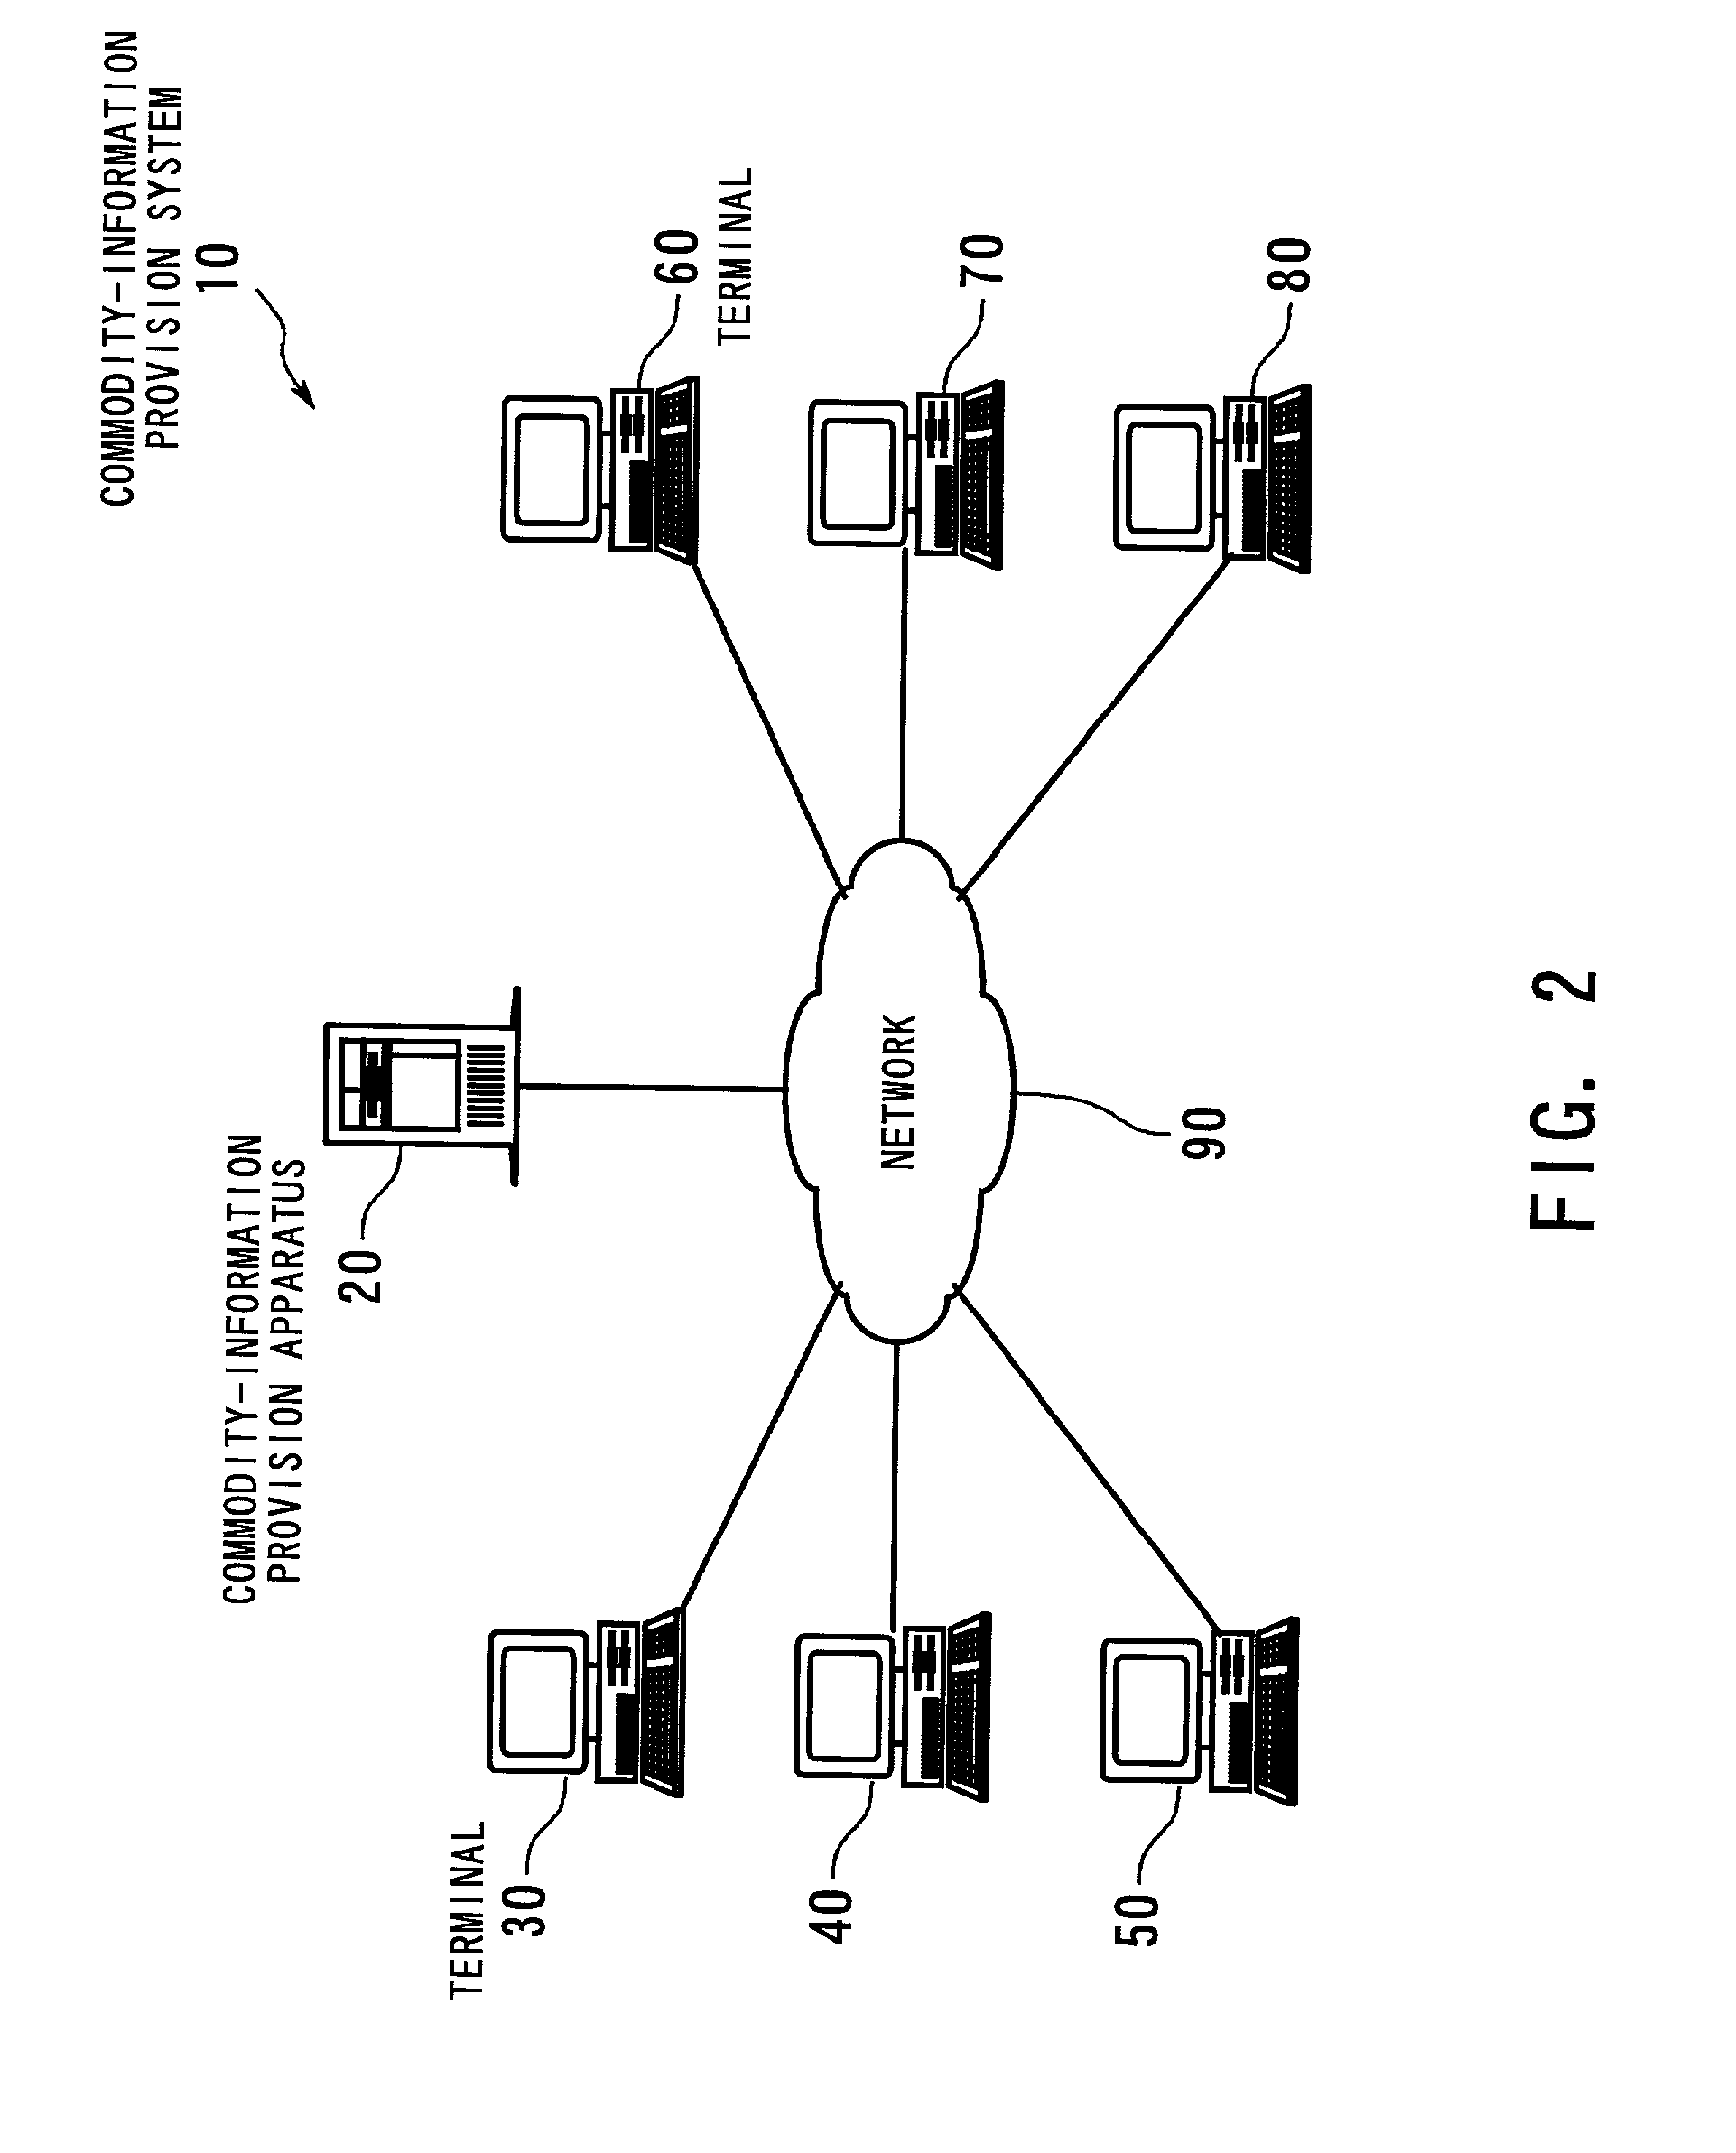 Method and apparatus for providing relative-evaluations of commodities to user by using commodity-comparison map